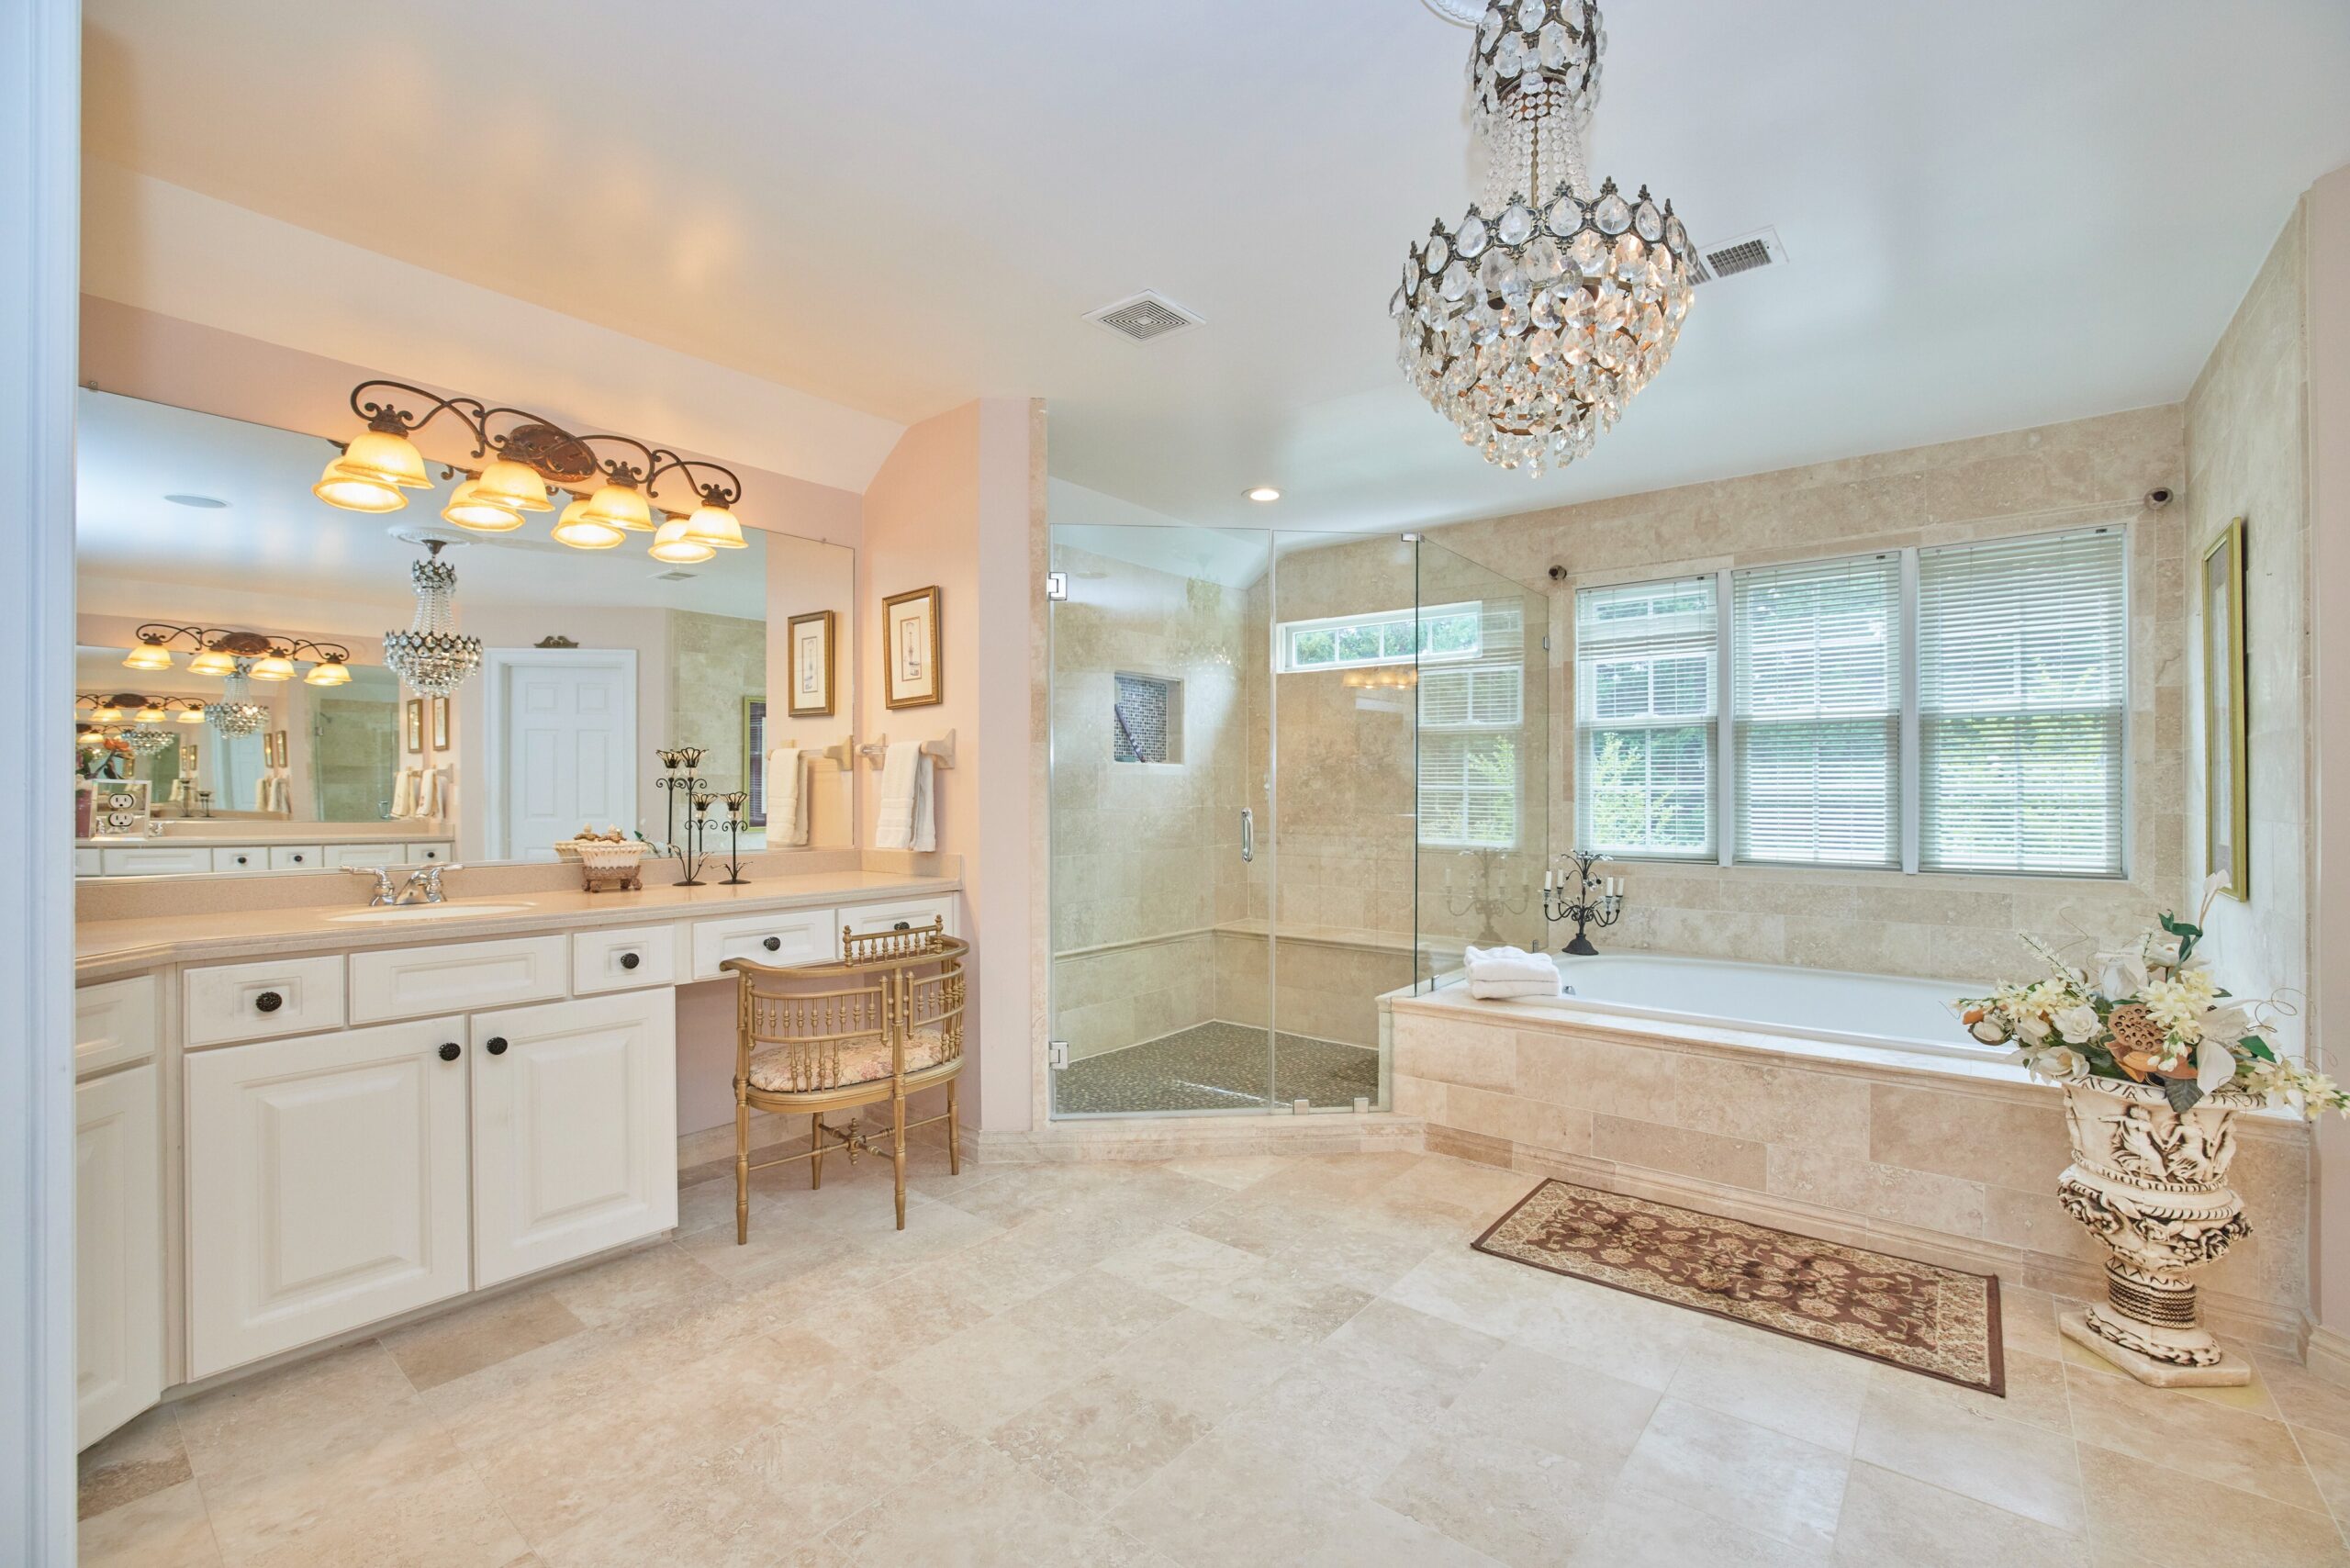 Flash photo of the master bathroom in a large master bedroom suite, with crystal chandelier, soaking tub, large shower and large vanity